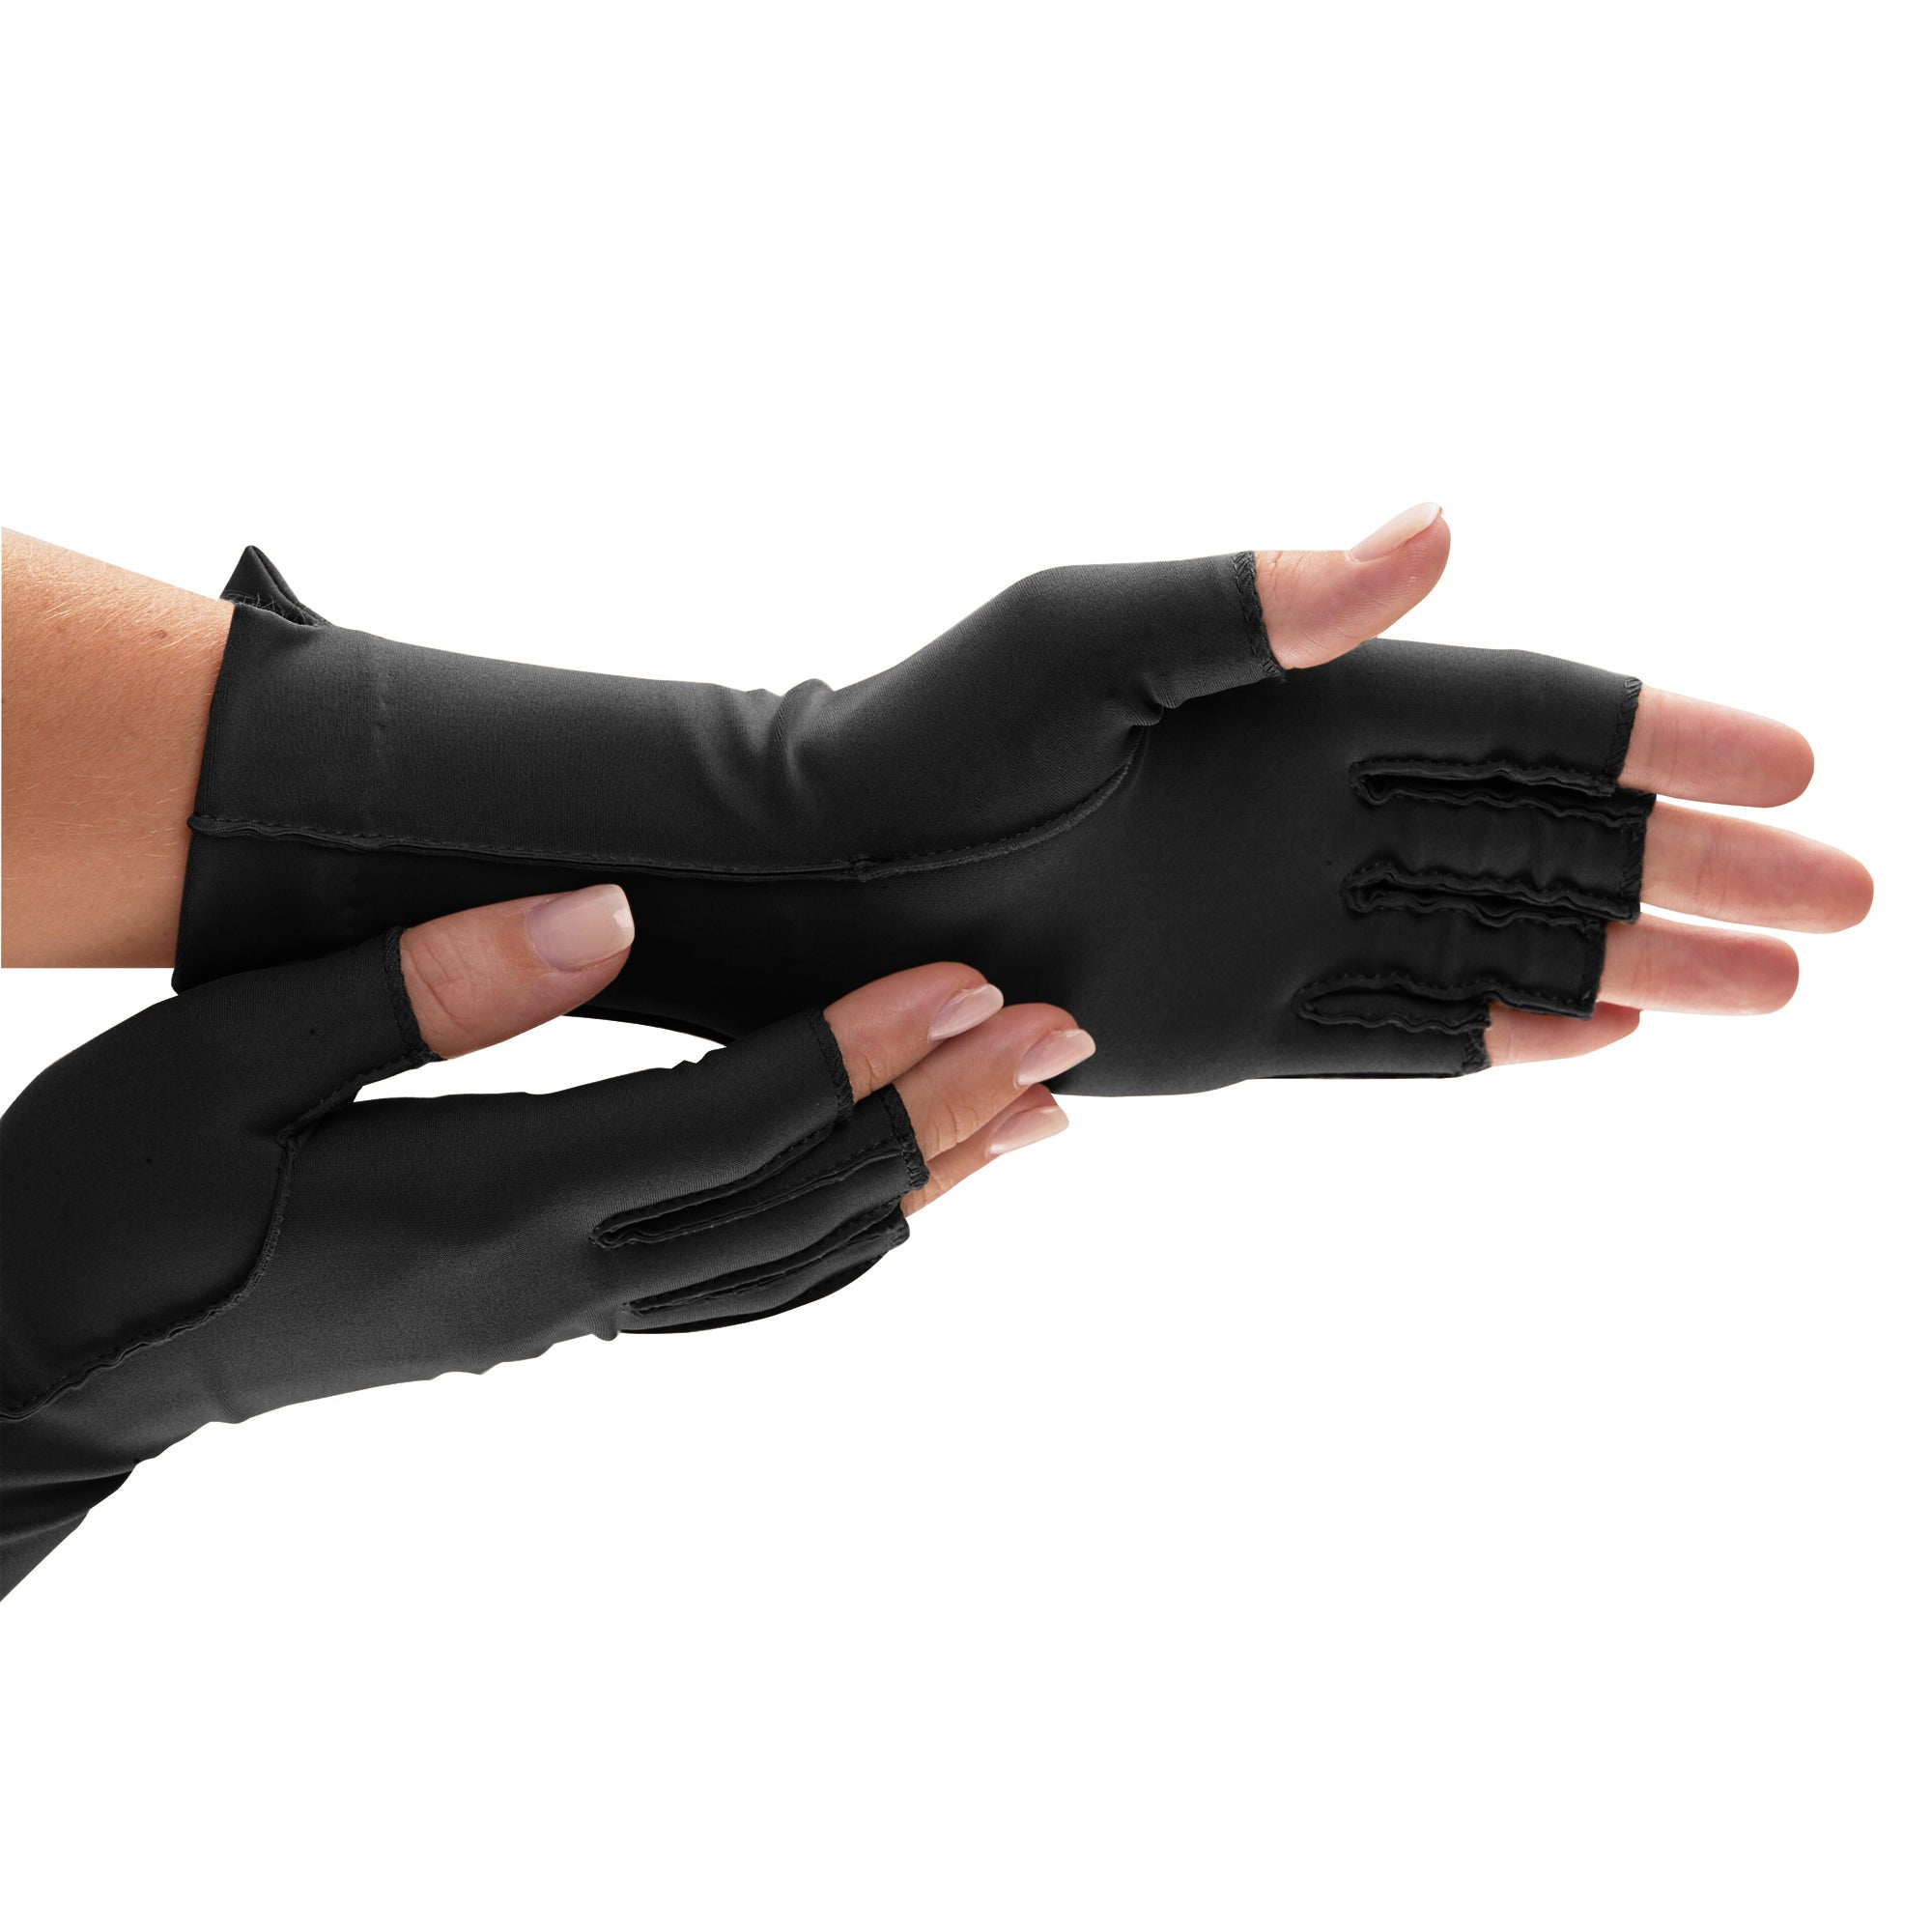 Isotoner Fingerless Therapeutic Compression Gloves Black Small